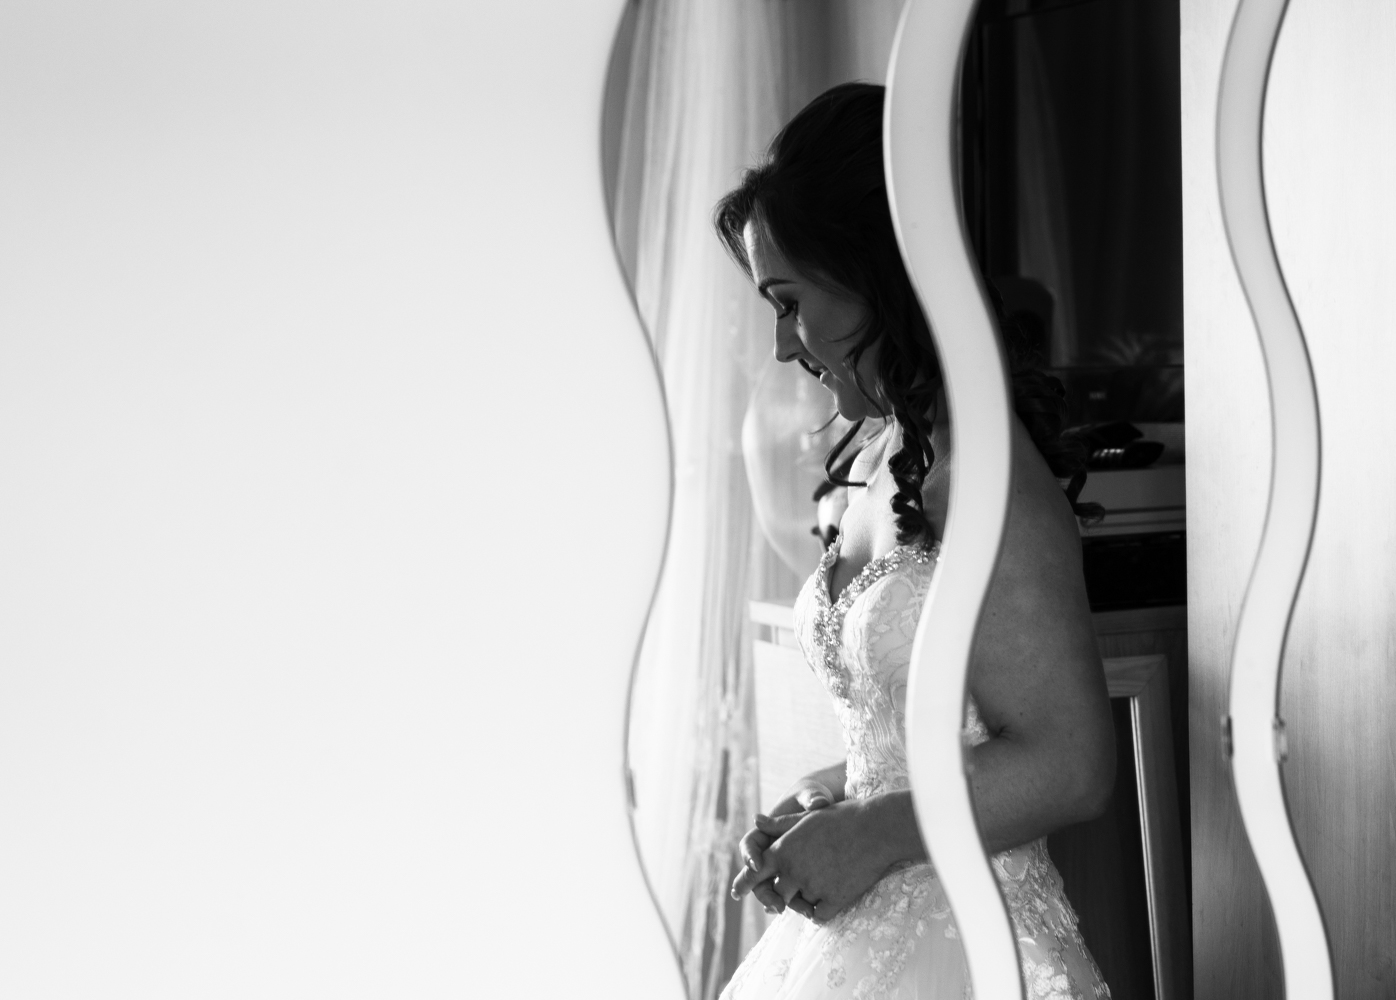 A black and white image of the bride reflected in a quirky wall mirror